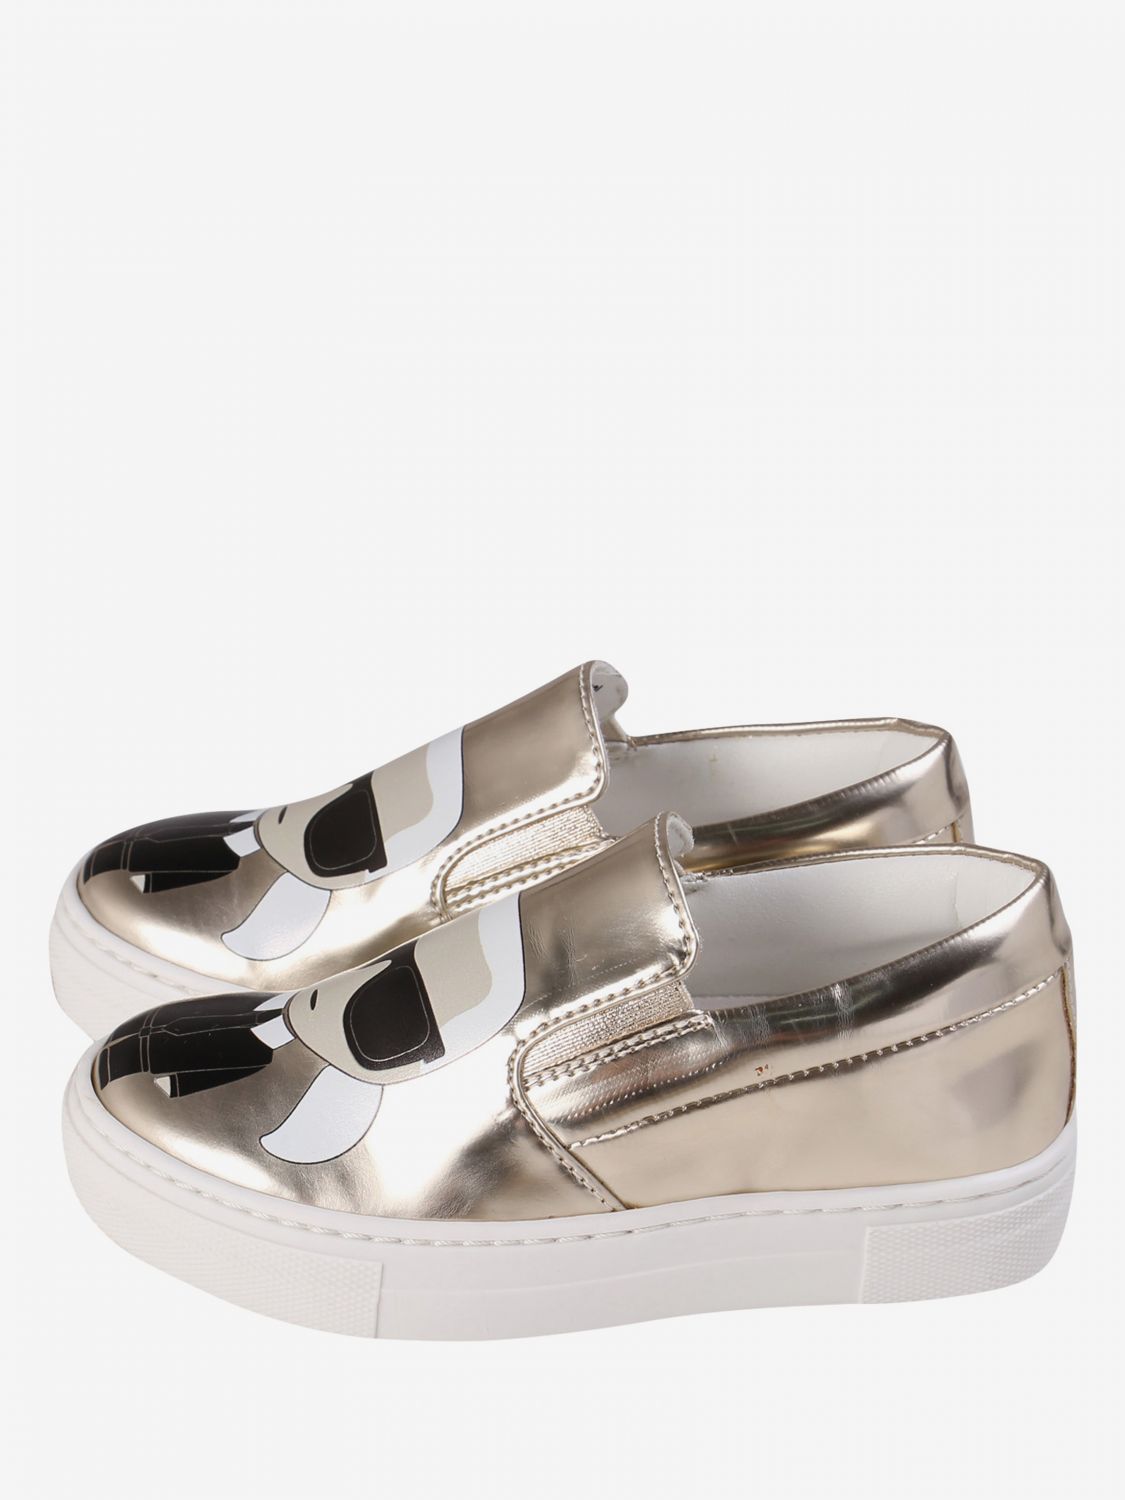 karl lagerfeld silver shoes